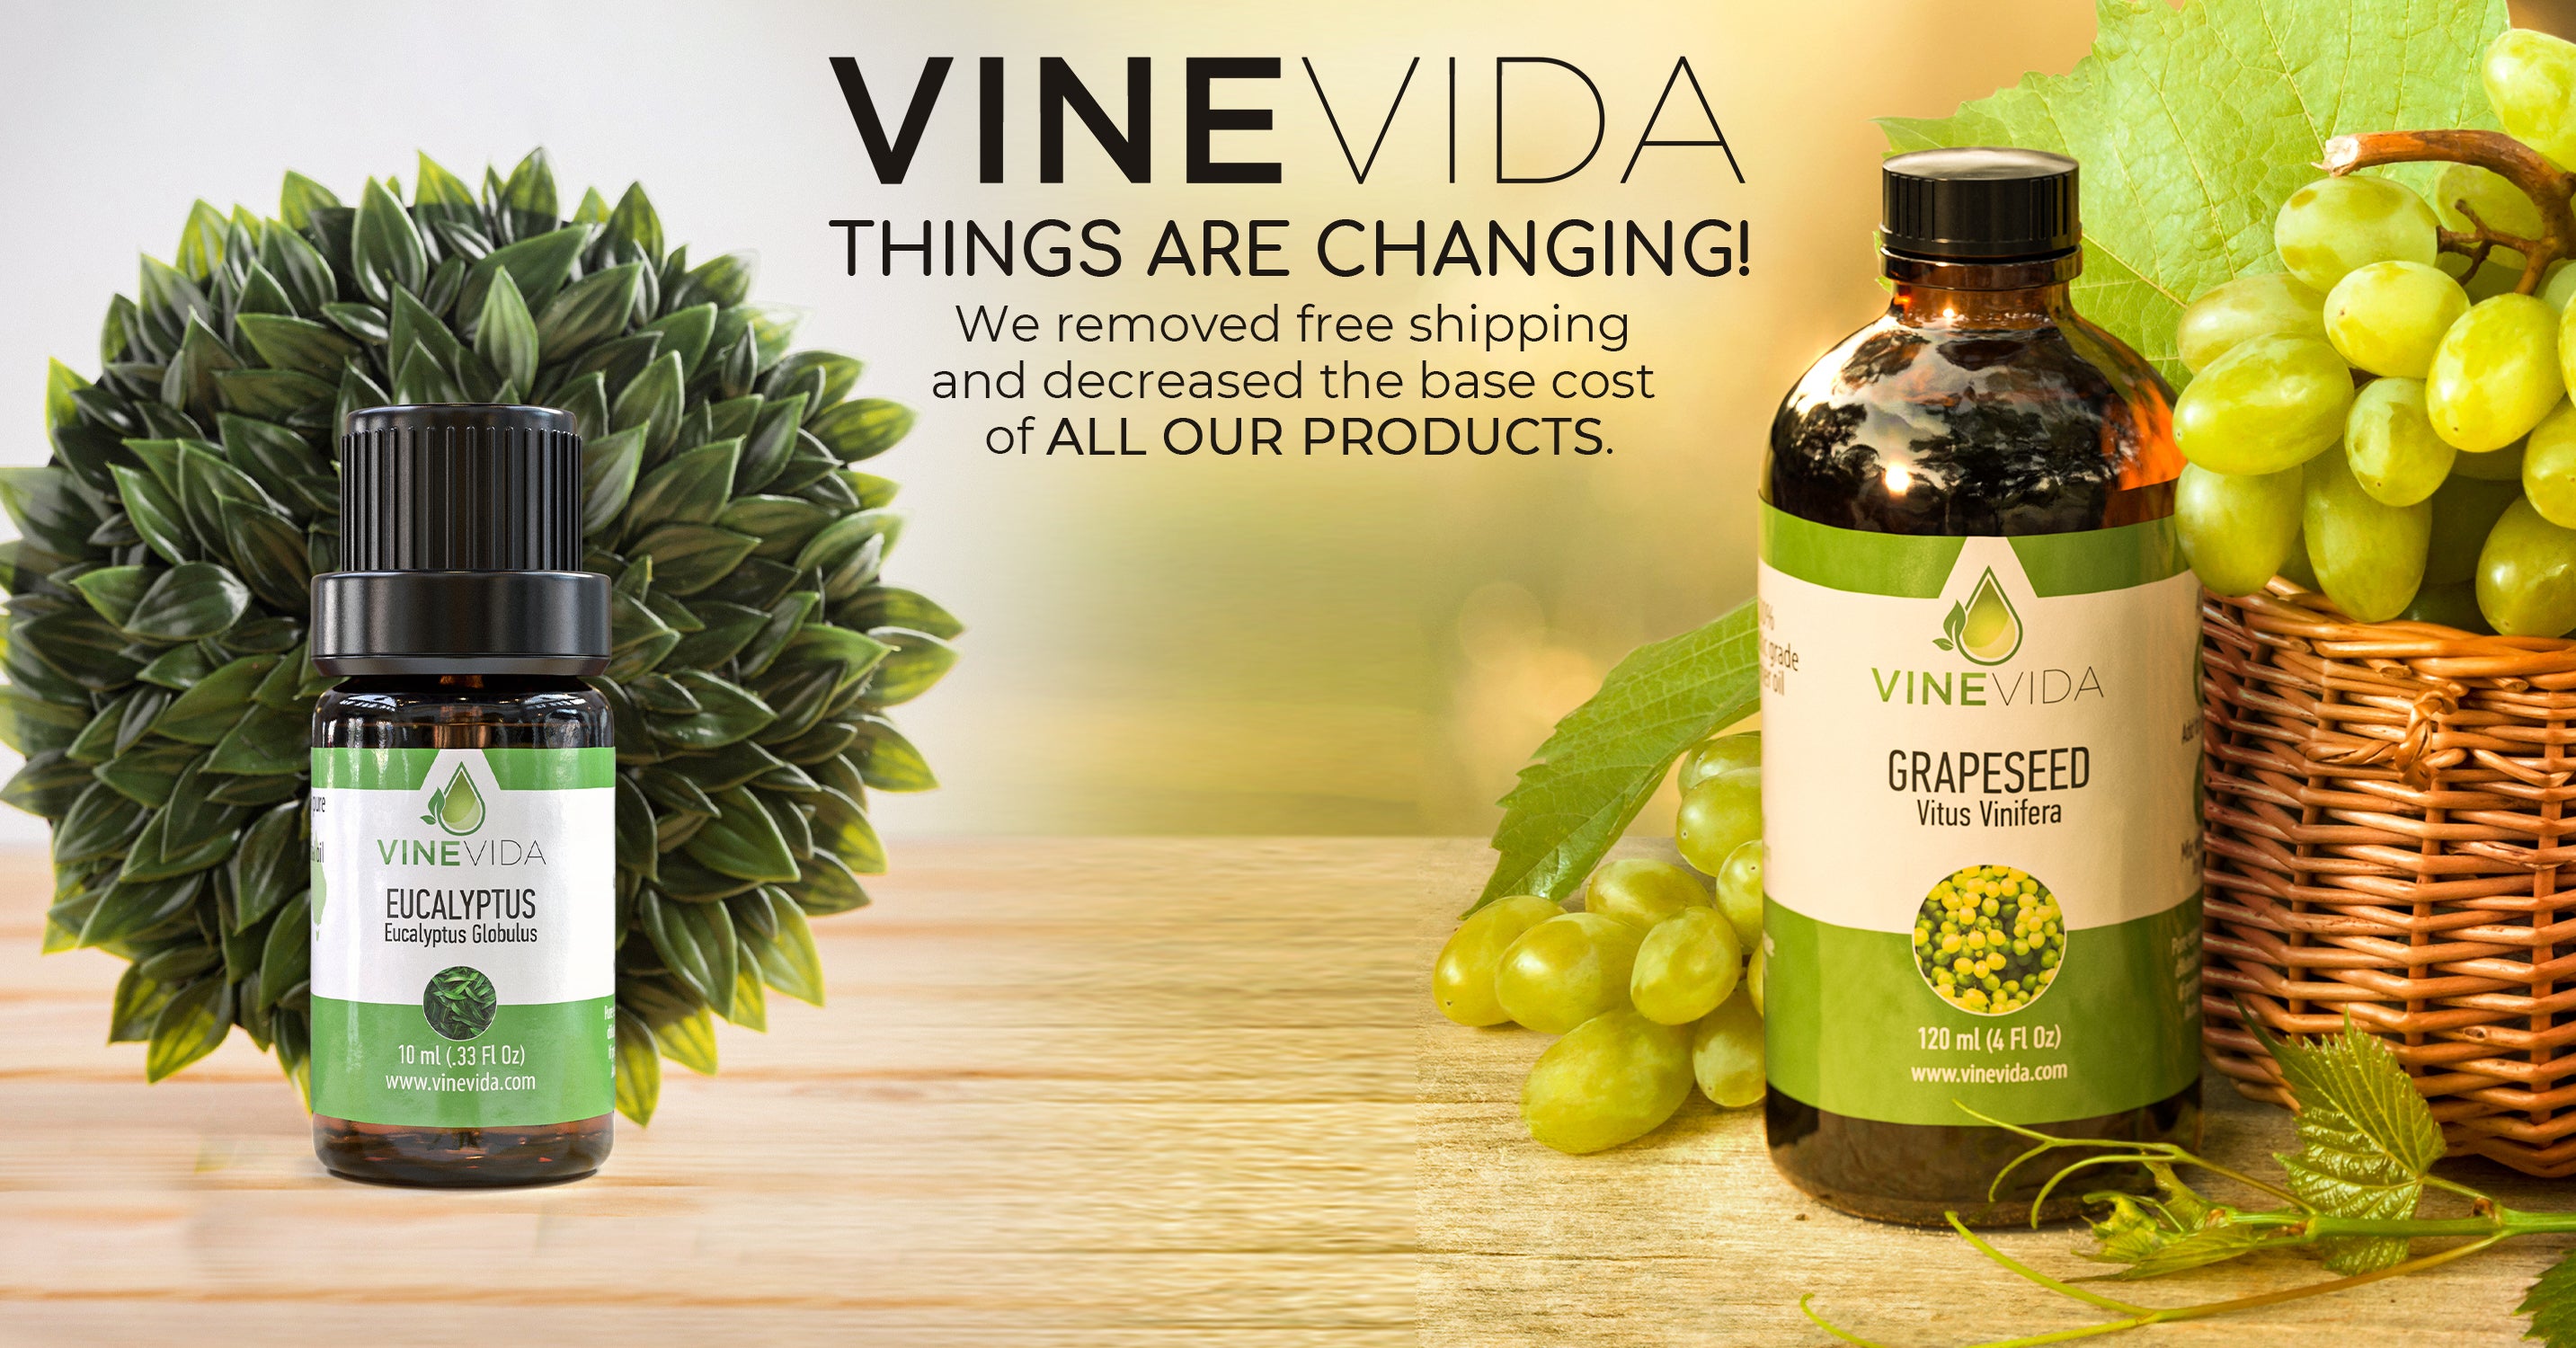 Statement from Our President: Things are Changing at VINEVIDA